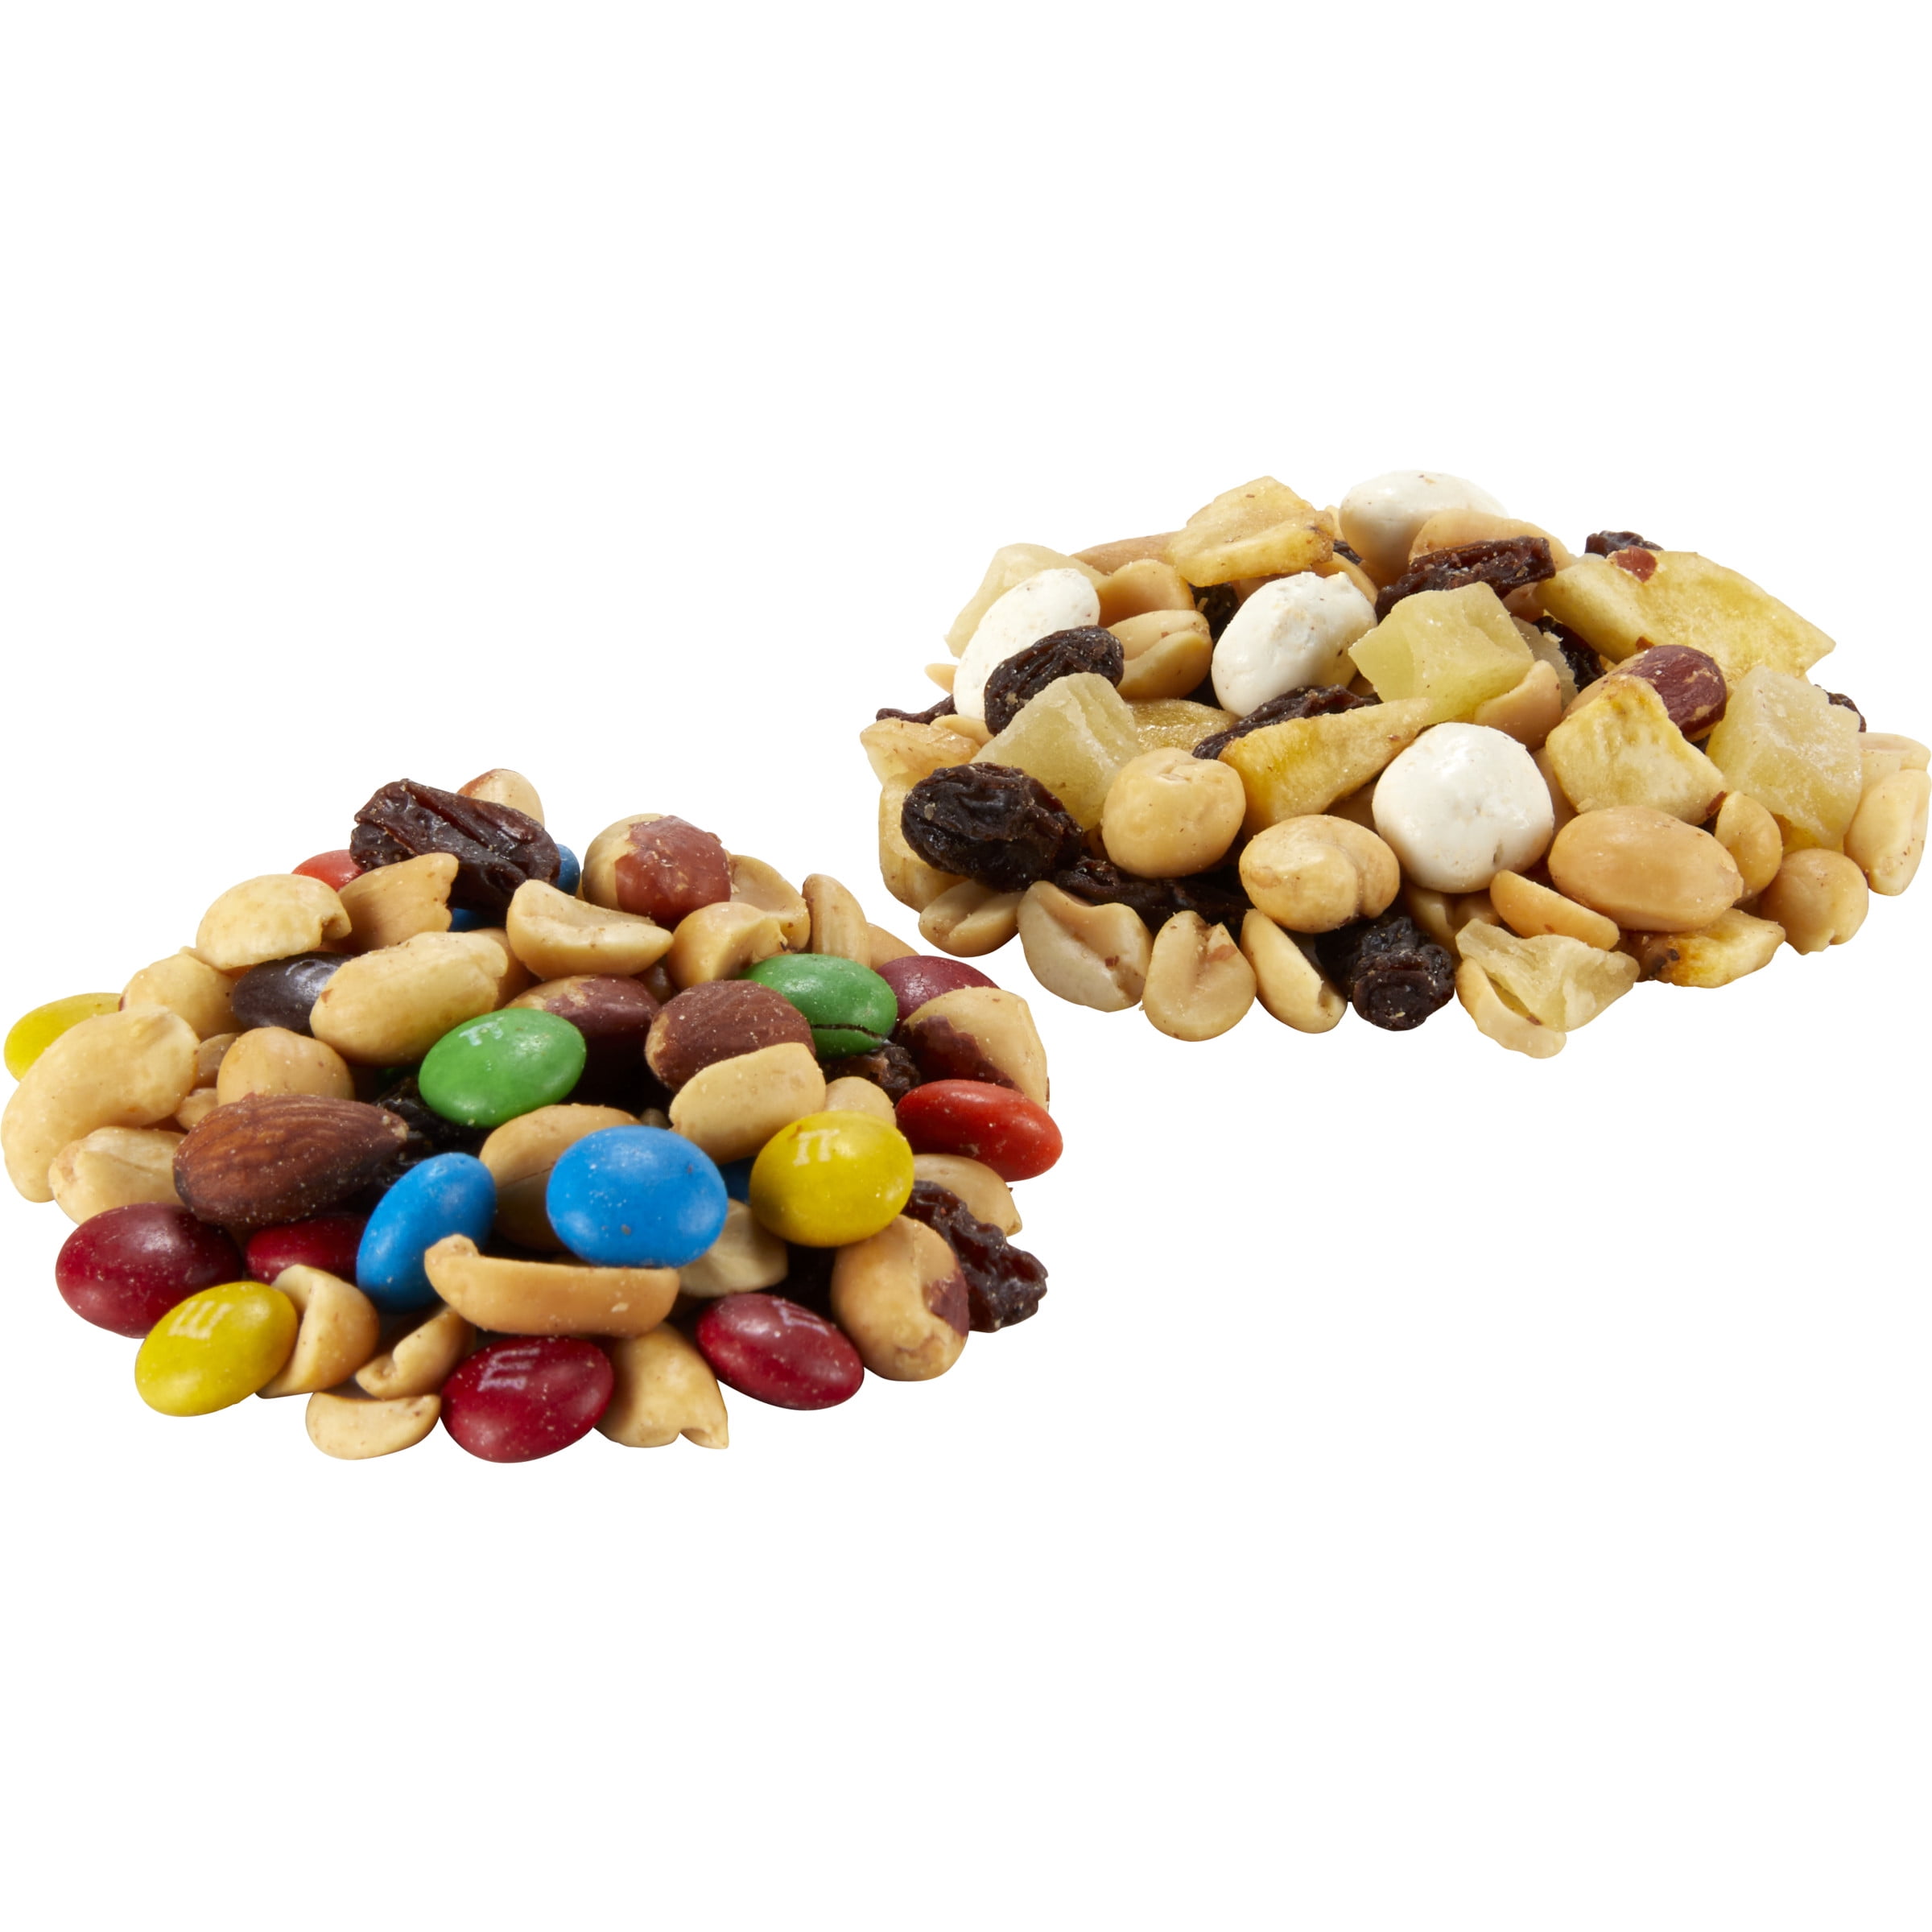 Planters Nuts & Chocolate M&M's (6 oz Bags, Pack of 12)